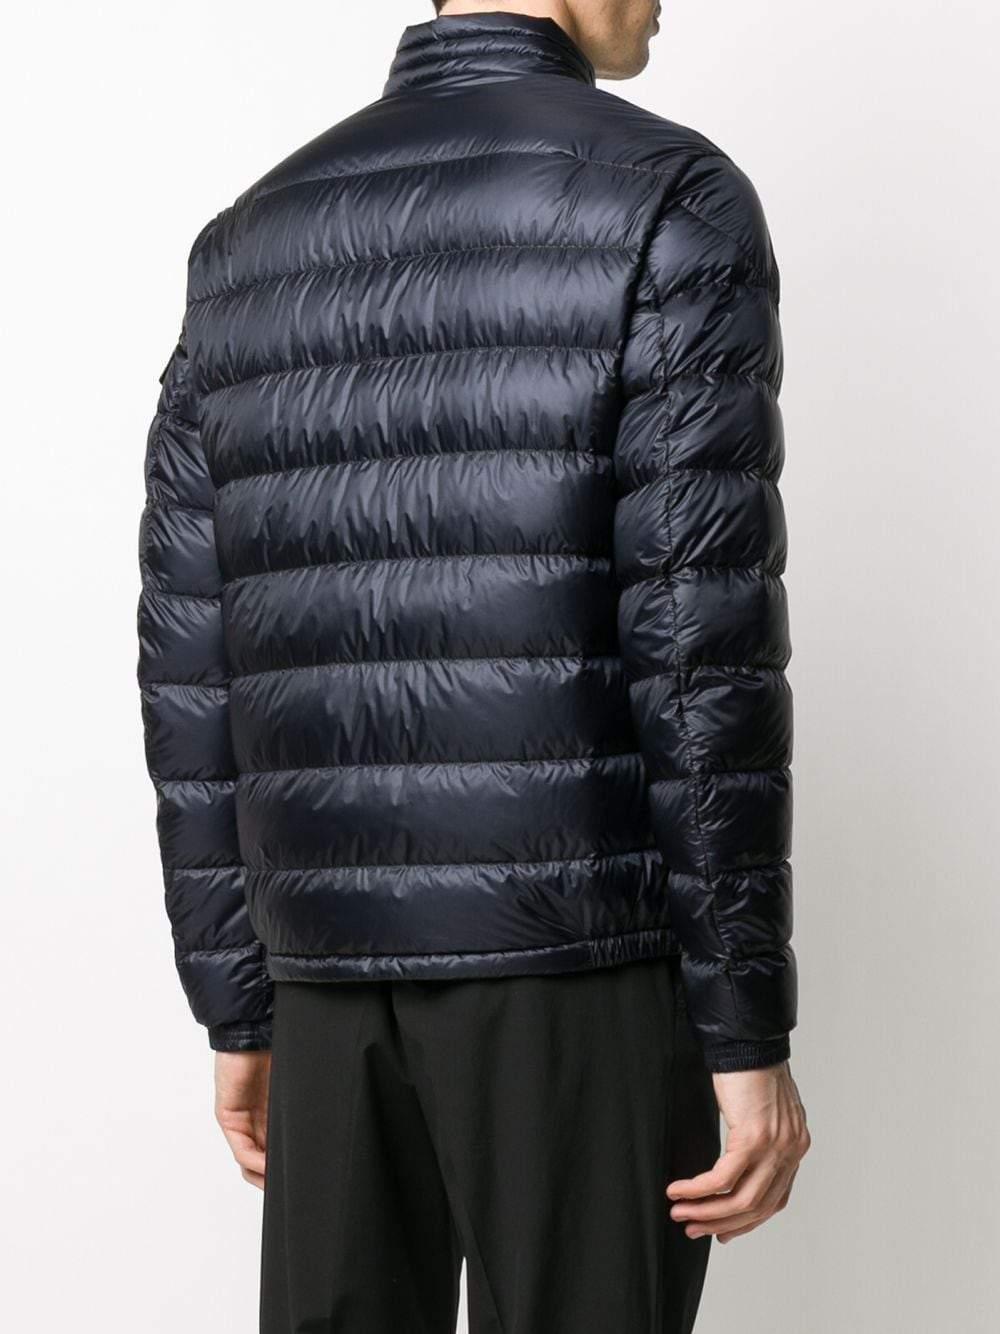 Moncler Synthetic Agay Giubbotto Padded Jacket Navy in Blue for Men - Lyst